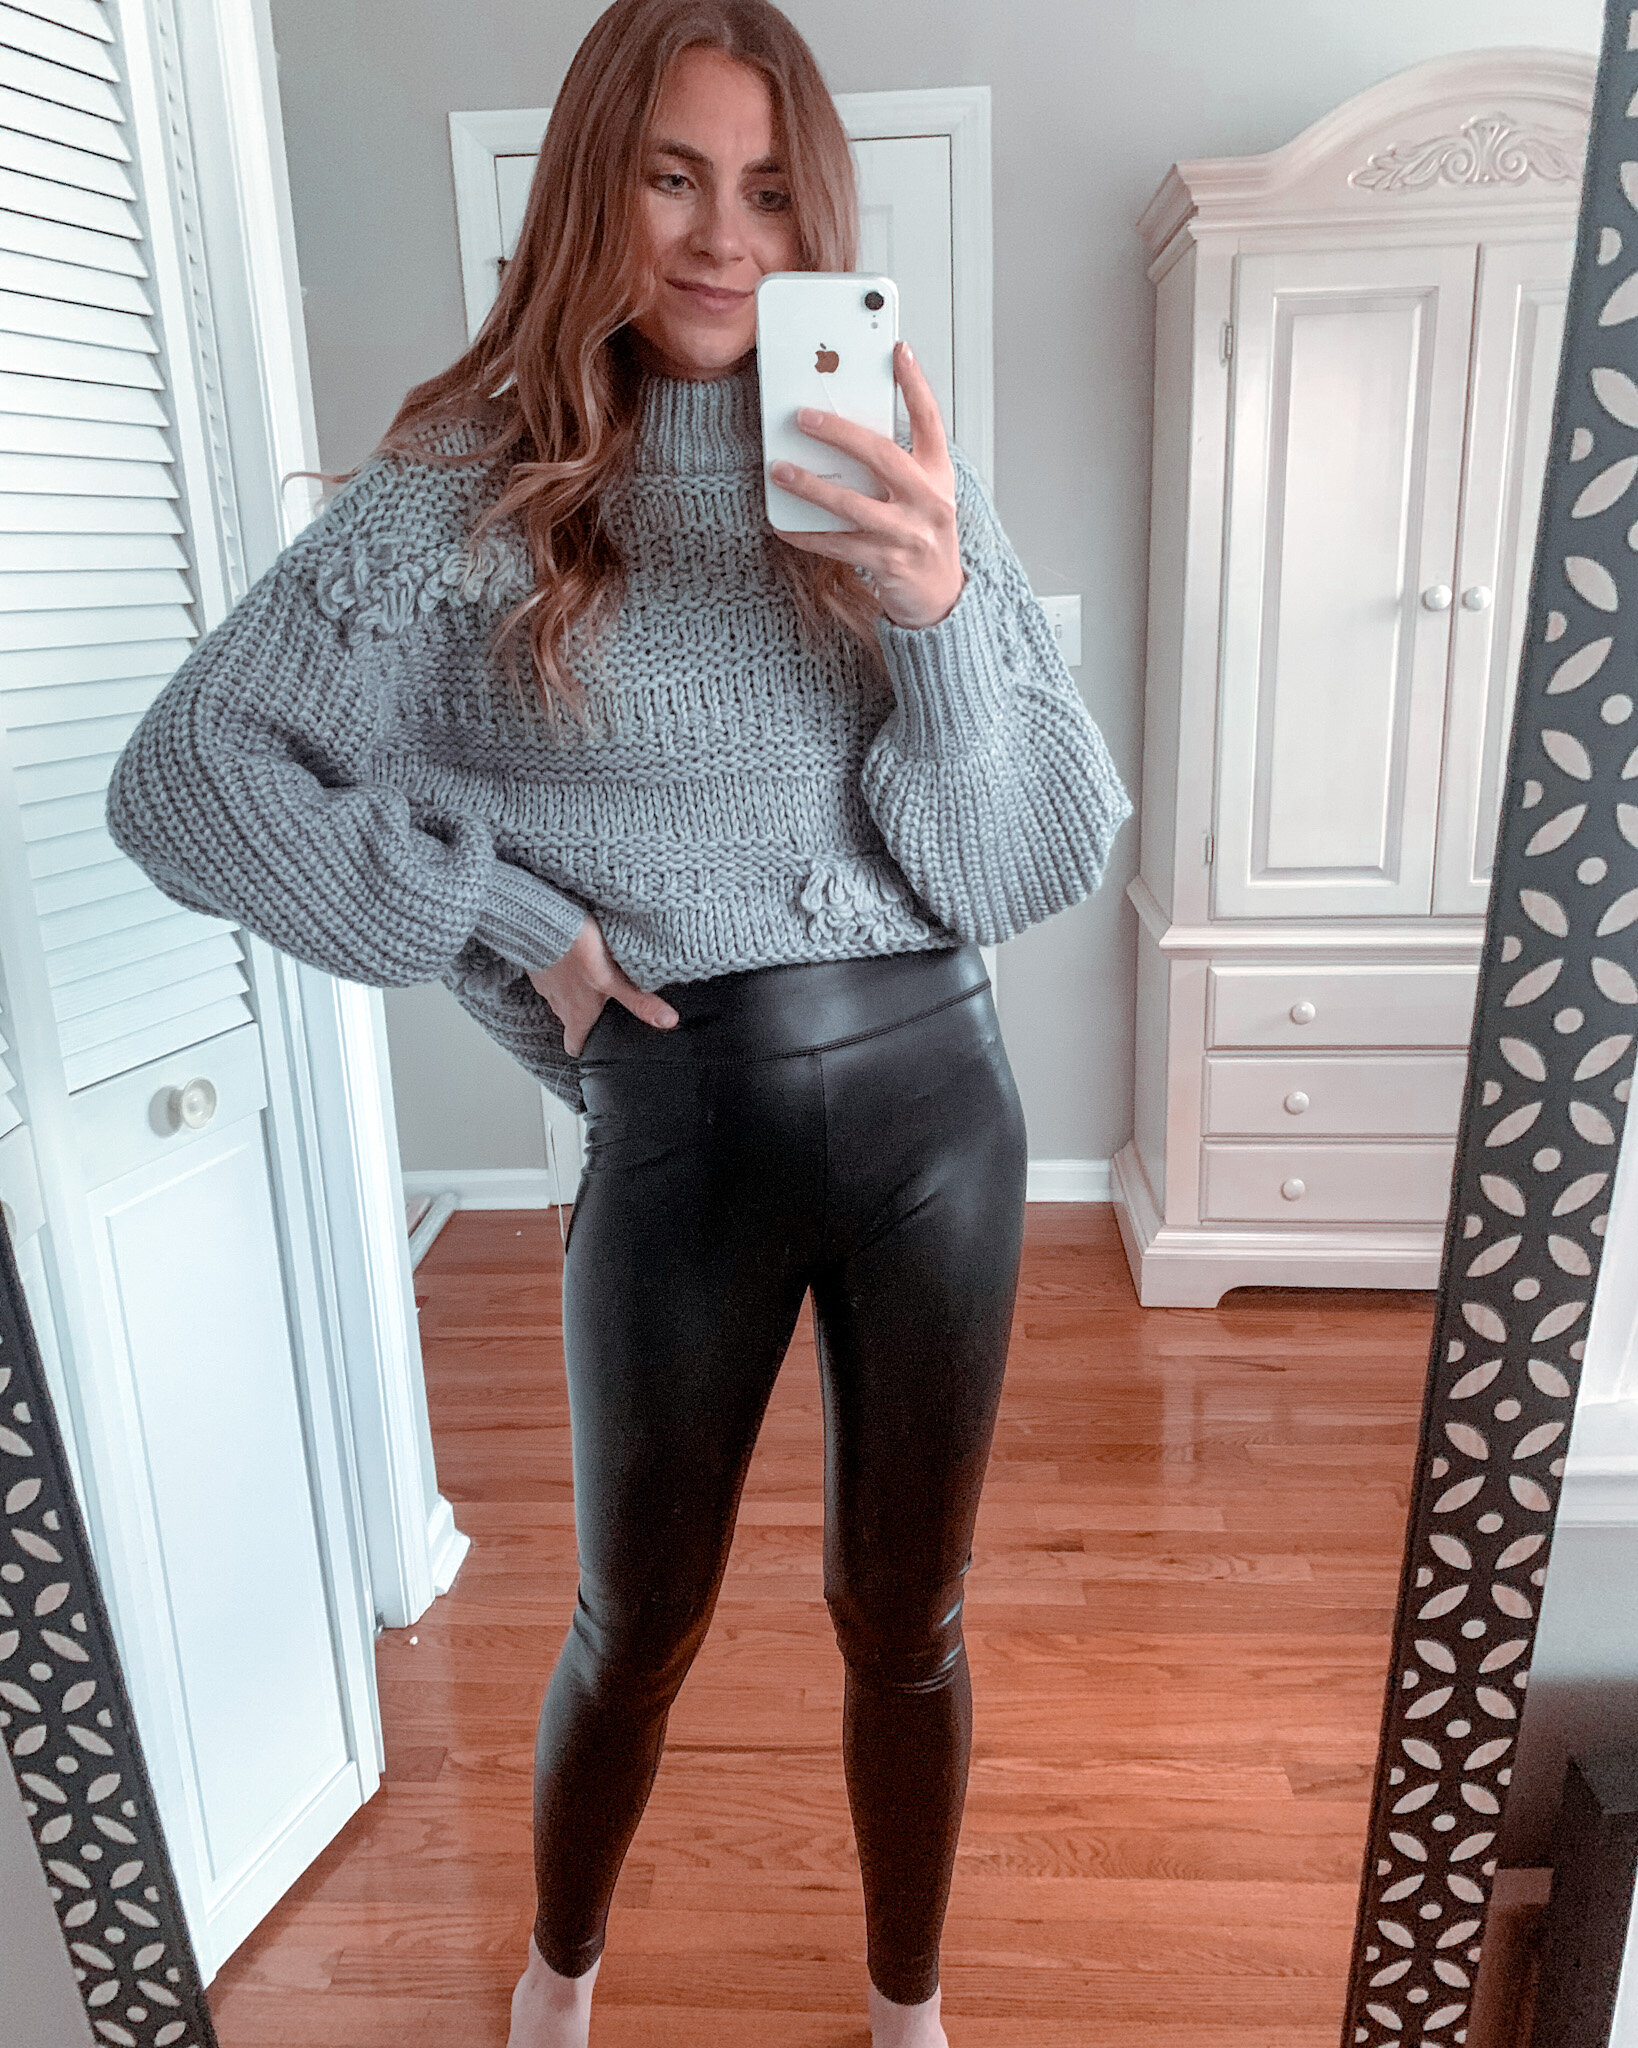 Spanx Leather Leggings Dupes - www.inf-inet.com